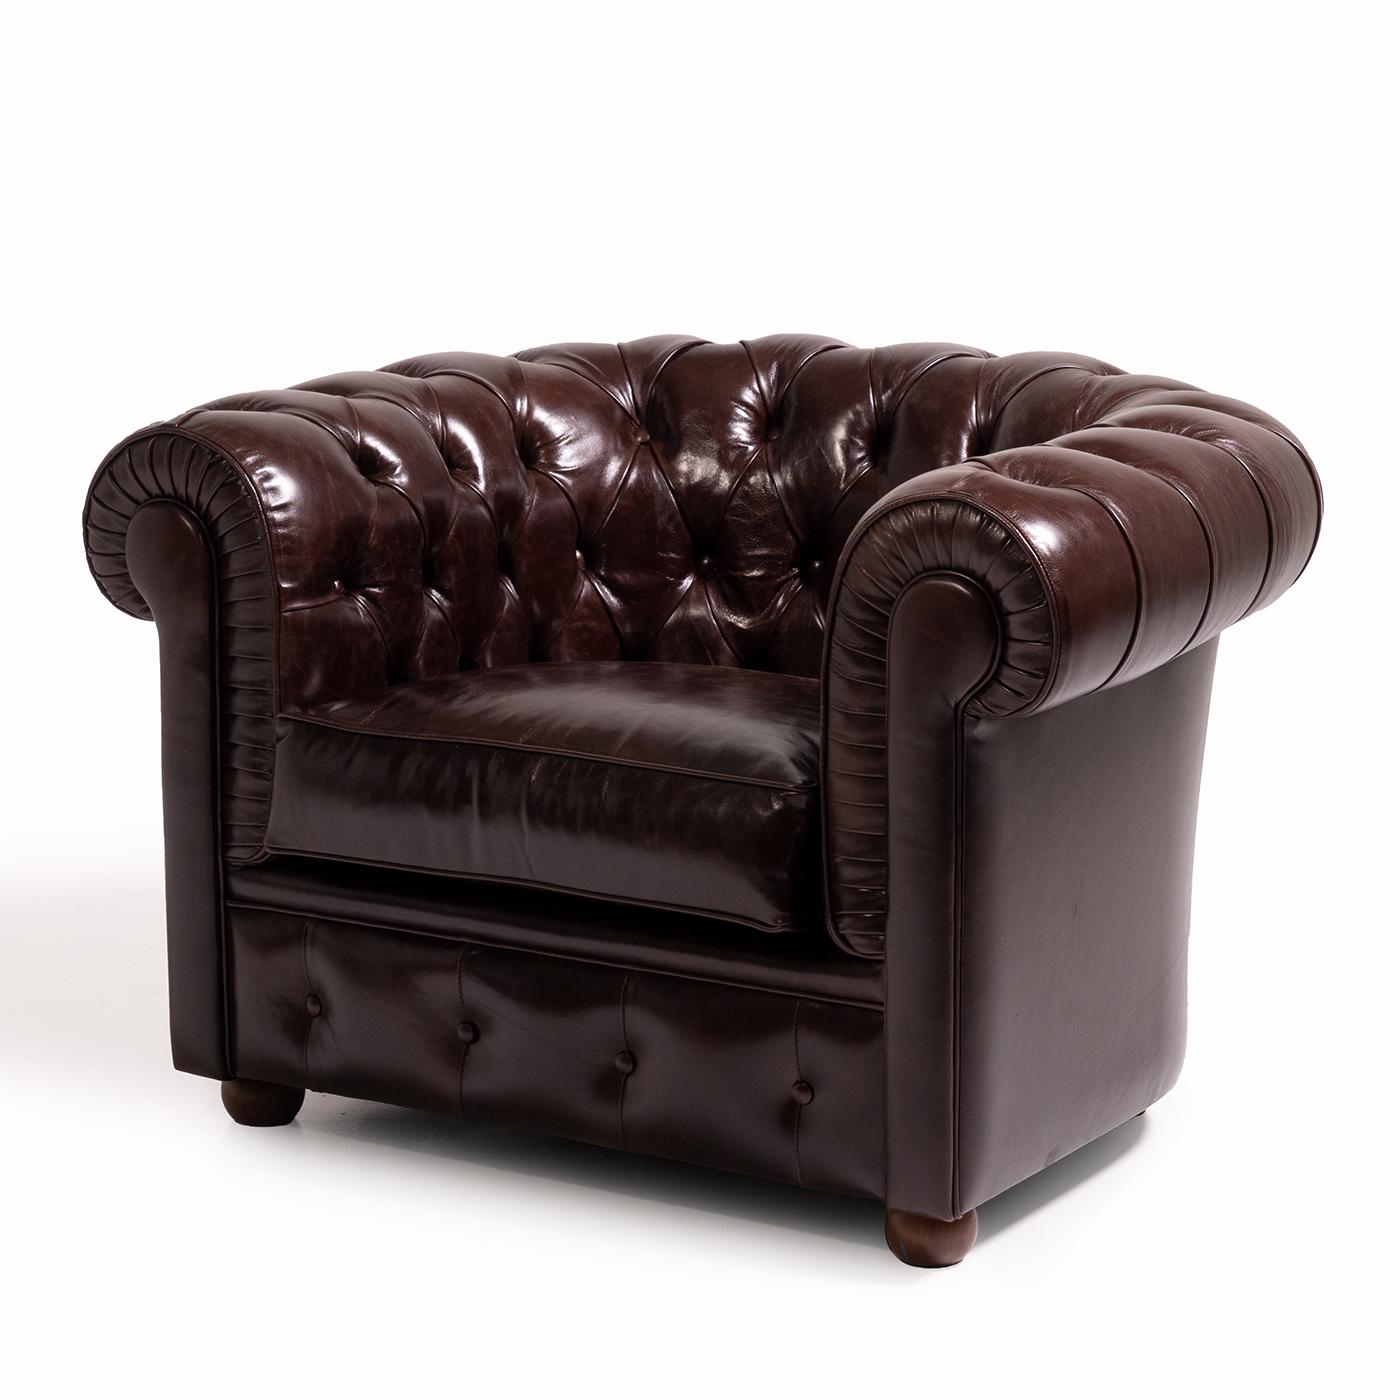 The Chesterfield armchair, from Tribeca Collection, is an icon of the world of the leather lounge, a timeless classic in the world of upholstery, an item that enriches any home and moves anyone who looks at it. For the realization of the